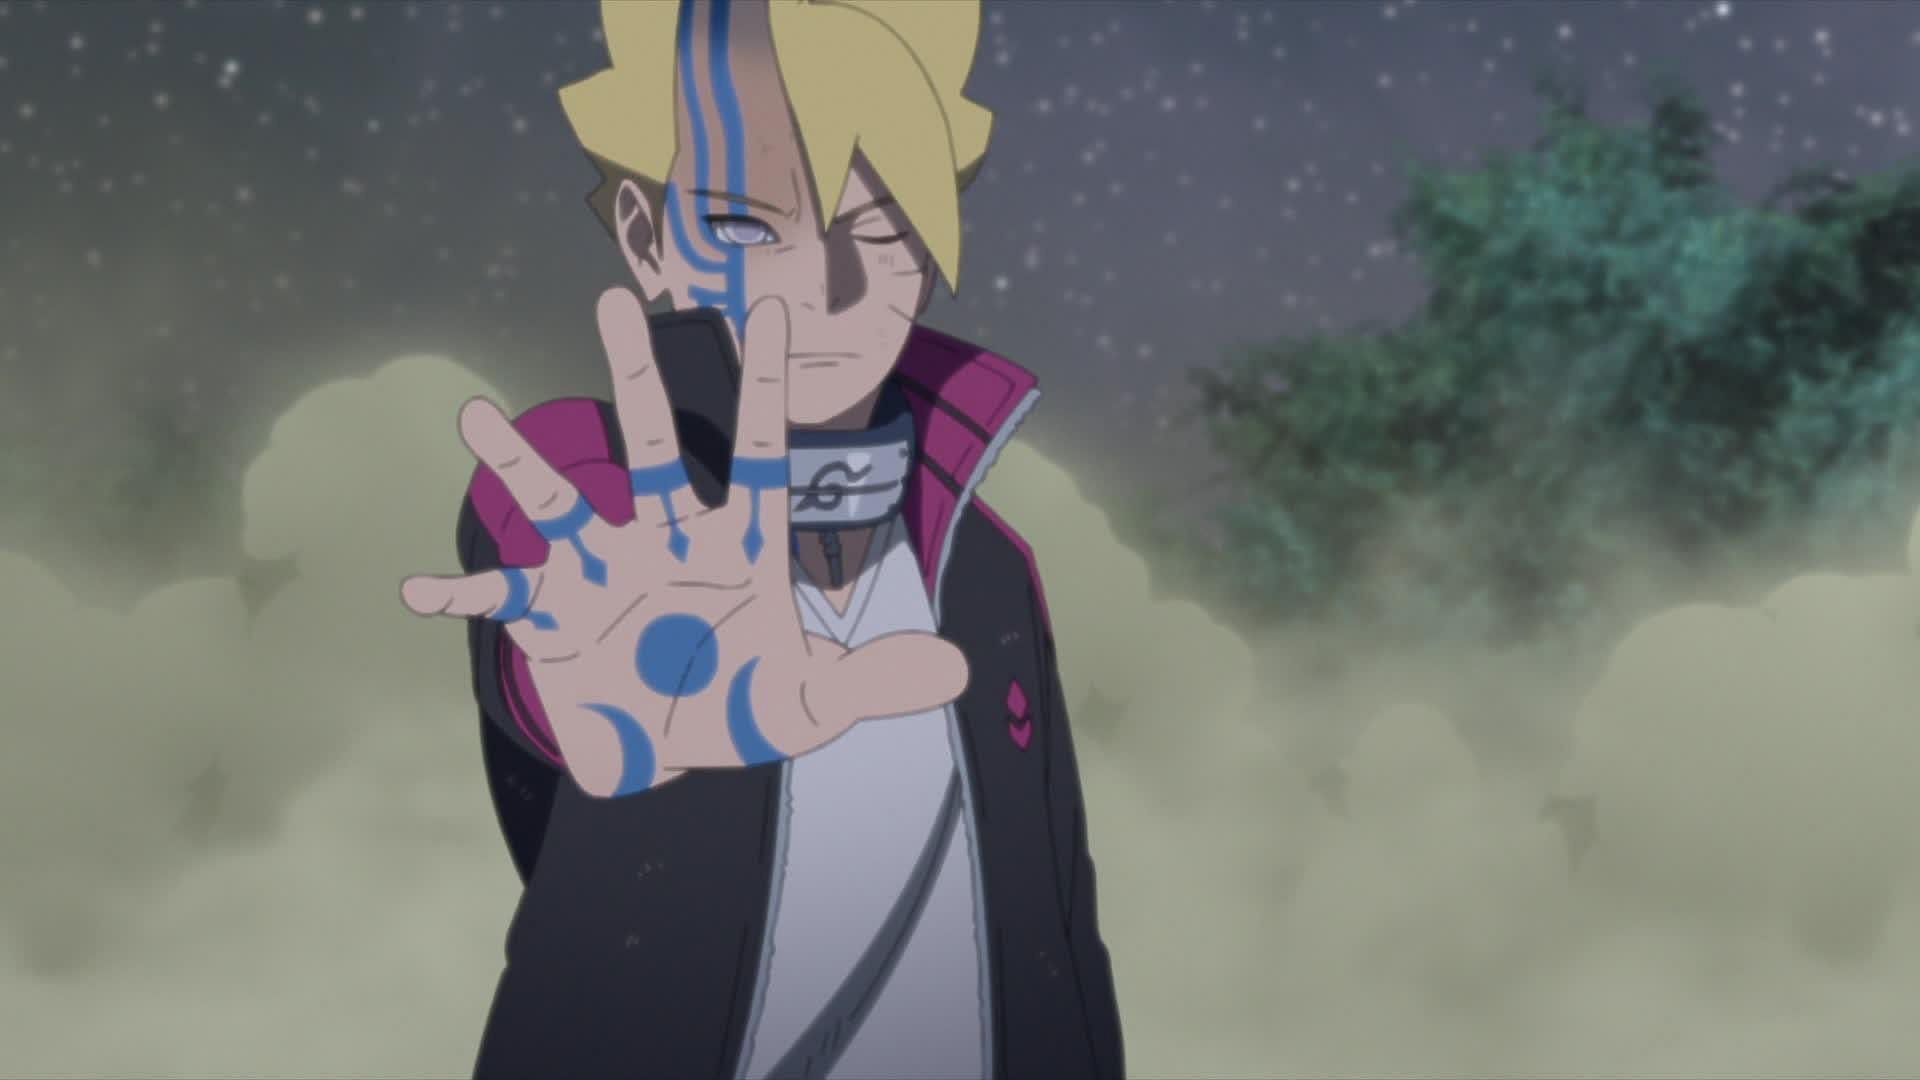 Fans react to the screenshots from the upcoming Boruto episode (Image via Twitter/@Abdul_S17)